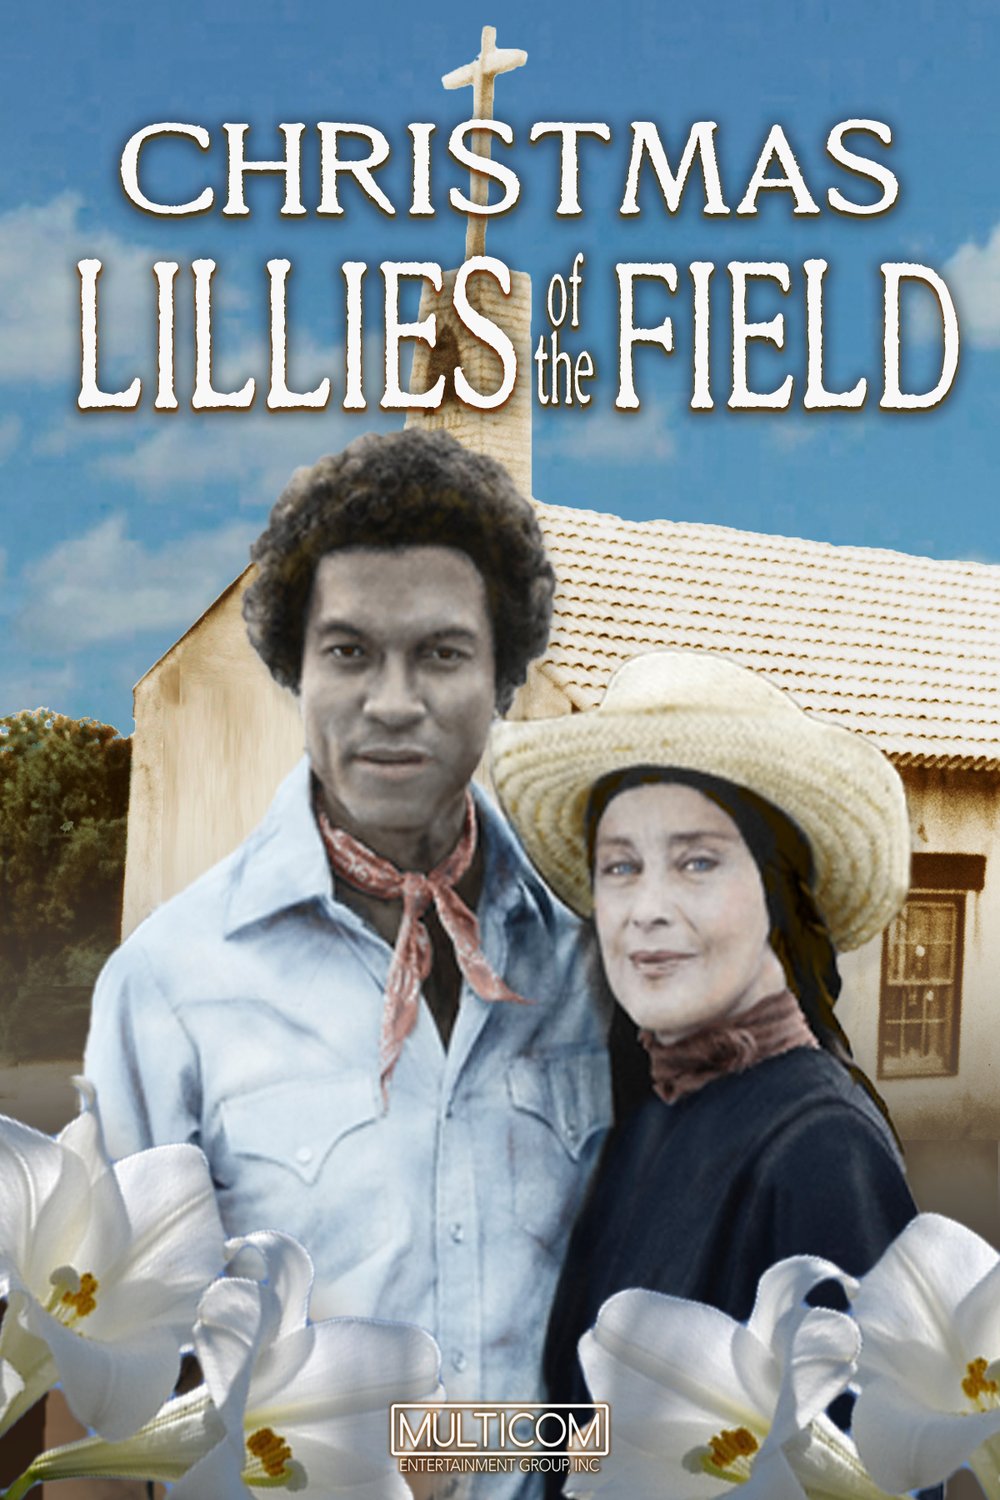 Poster of the movie Christmas Lilies of the Field